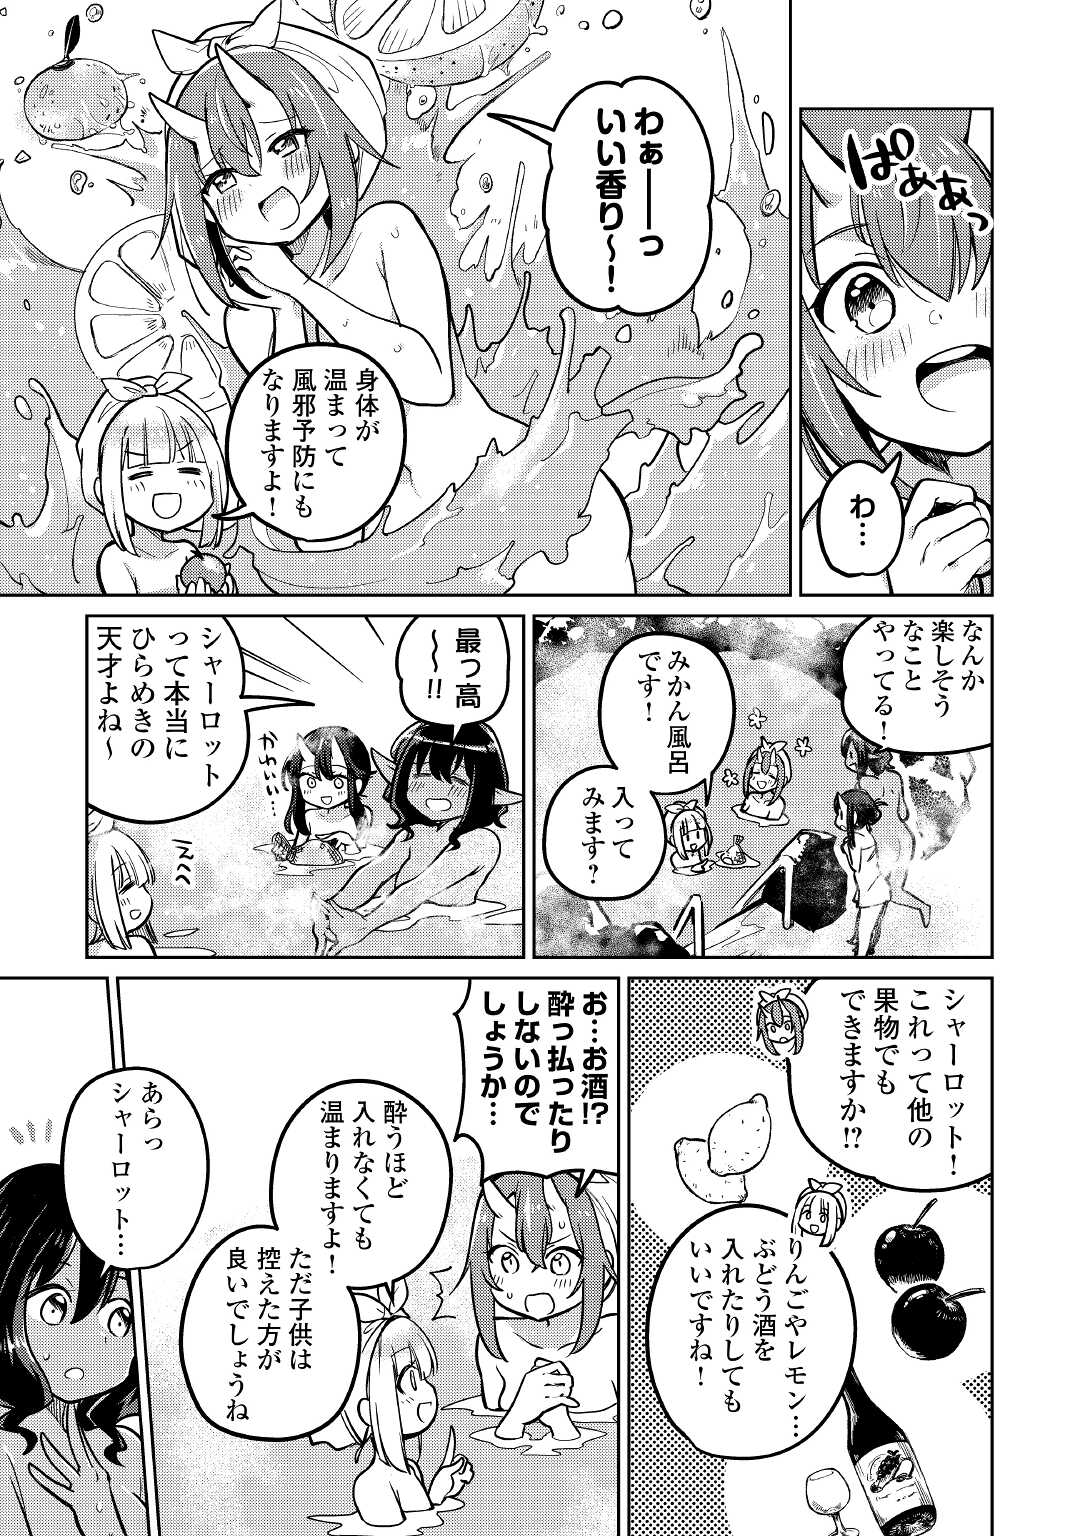 The Former Structural Researcher’s Story of Otherworldly Adventure 第41話 - Page 7